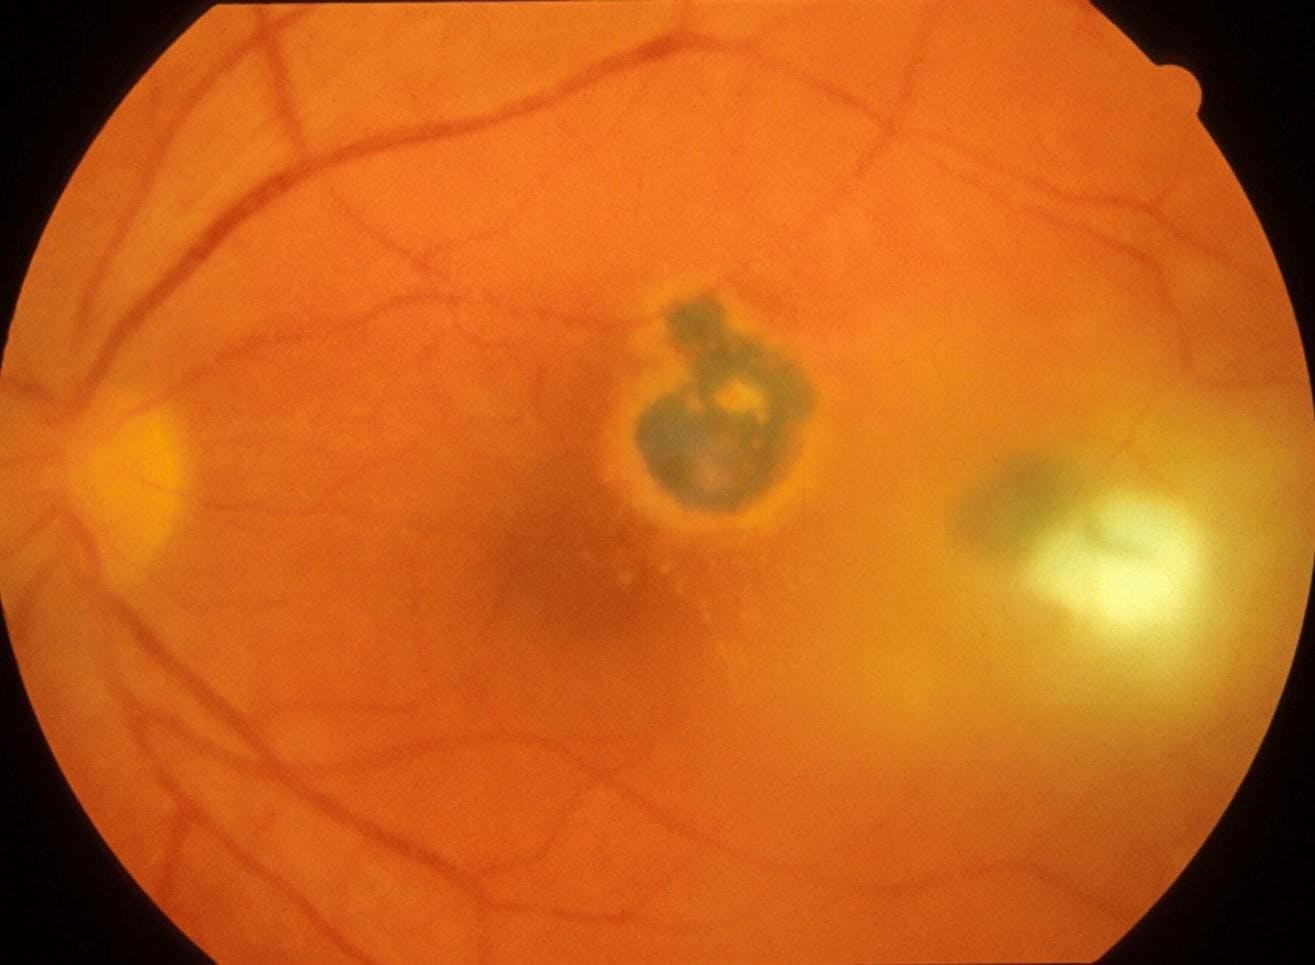 Figure 6: Classical presentation of posterior uveitis secondary to Toxoplasmosis with a focal area of retinitis proximal to a chronic pigmented scar.